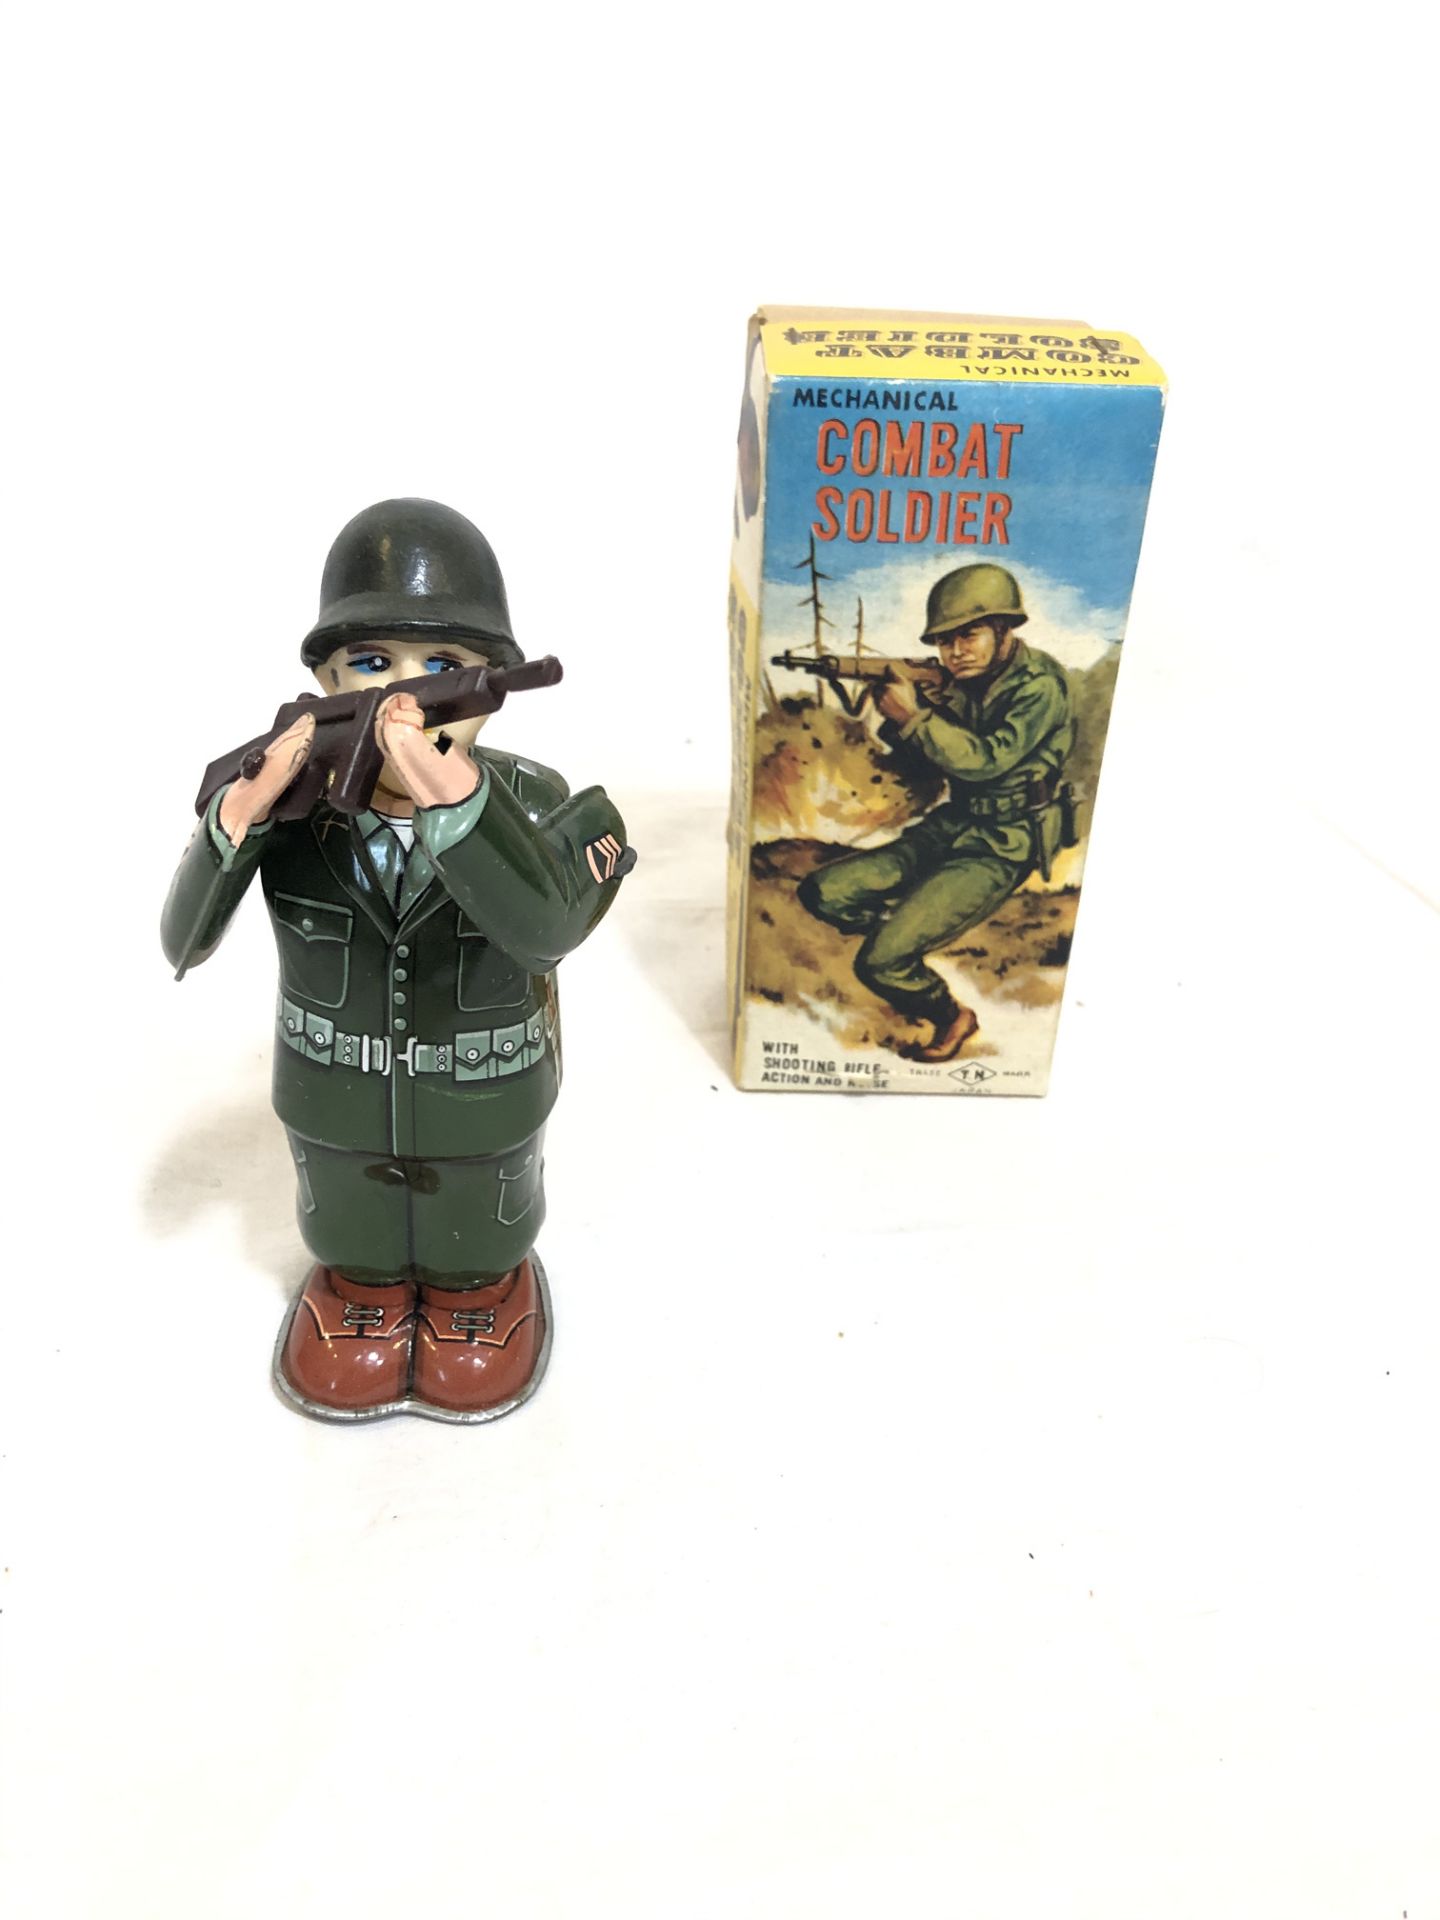 Tin Toy Mechanical Combat Soldier - Image 3 of 3